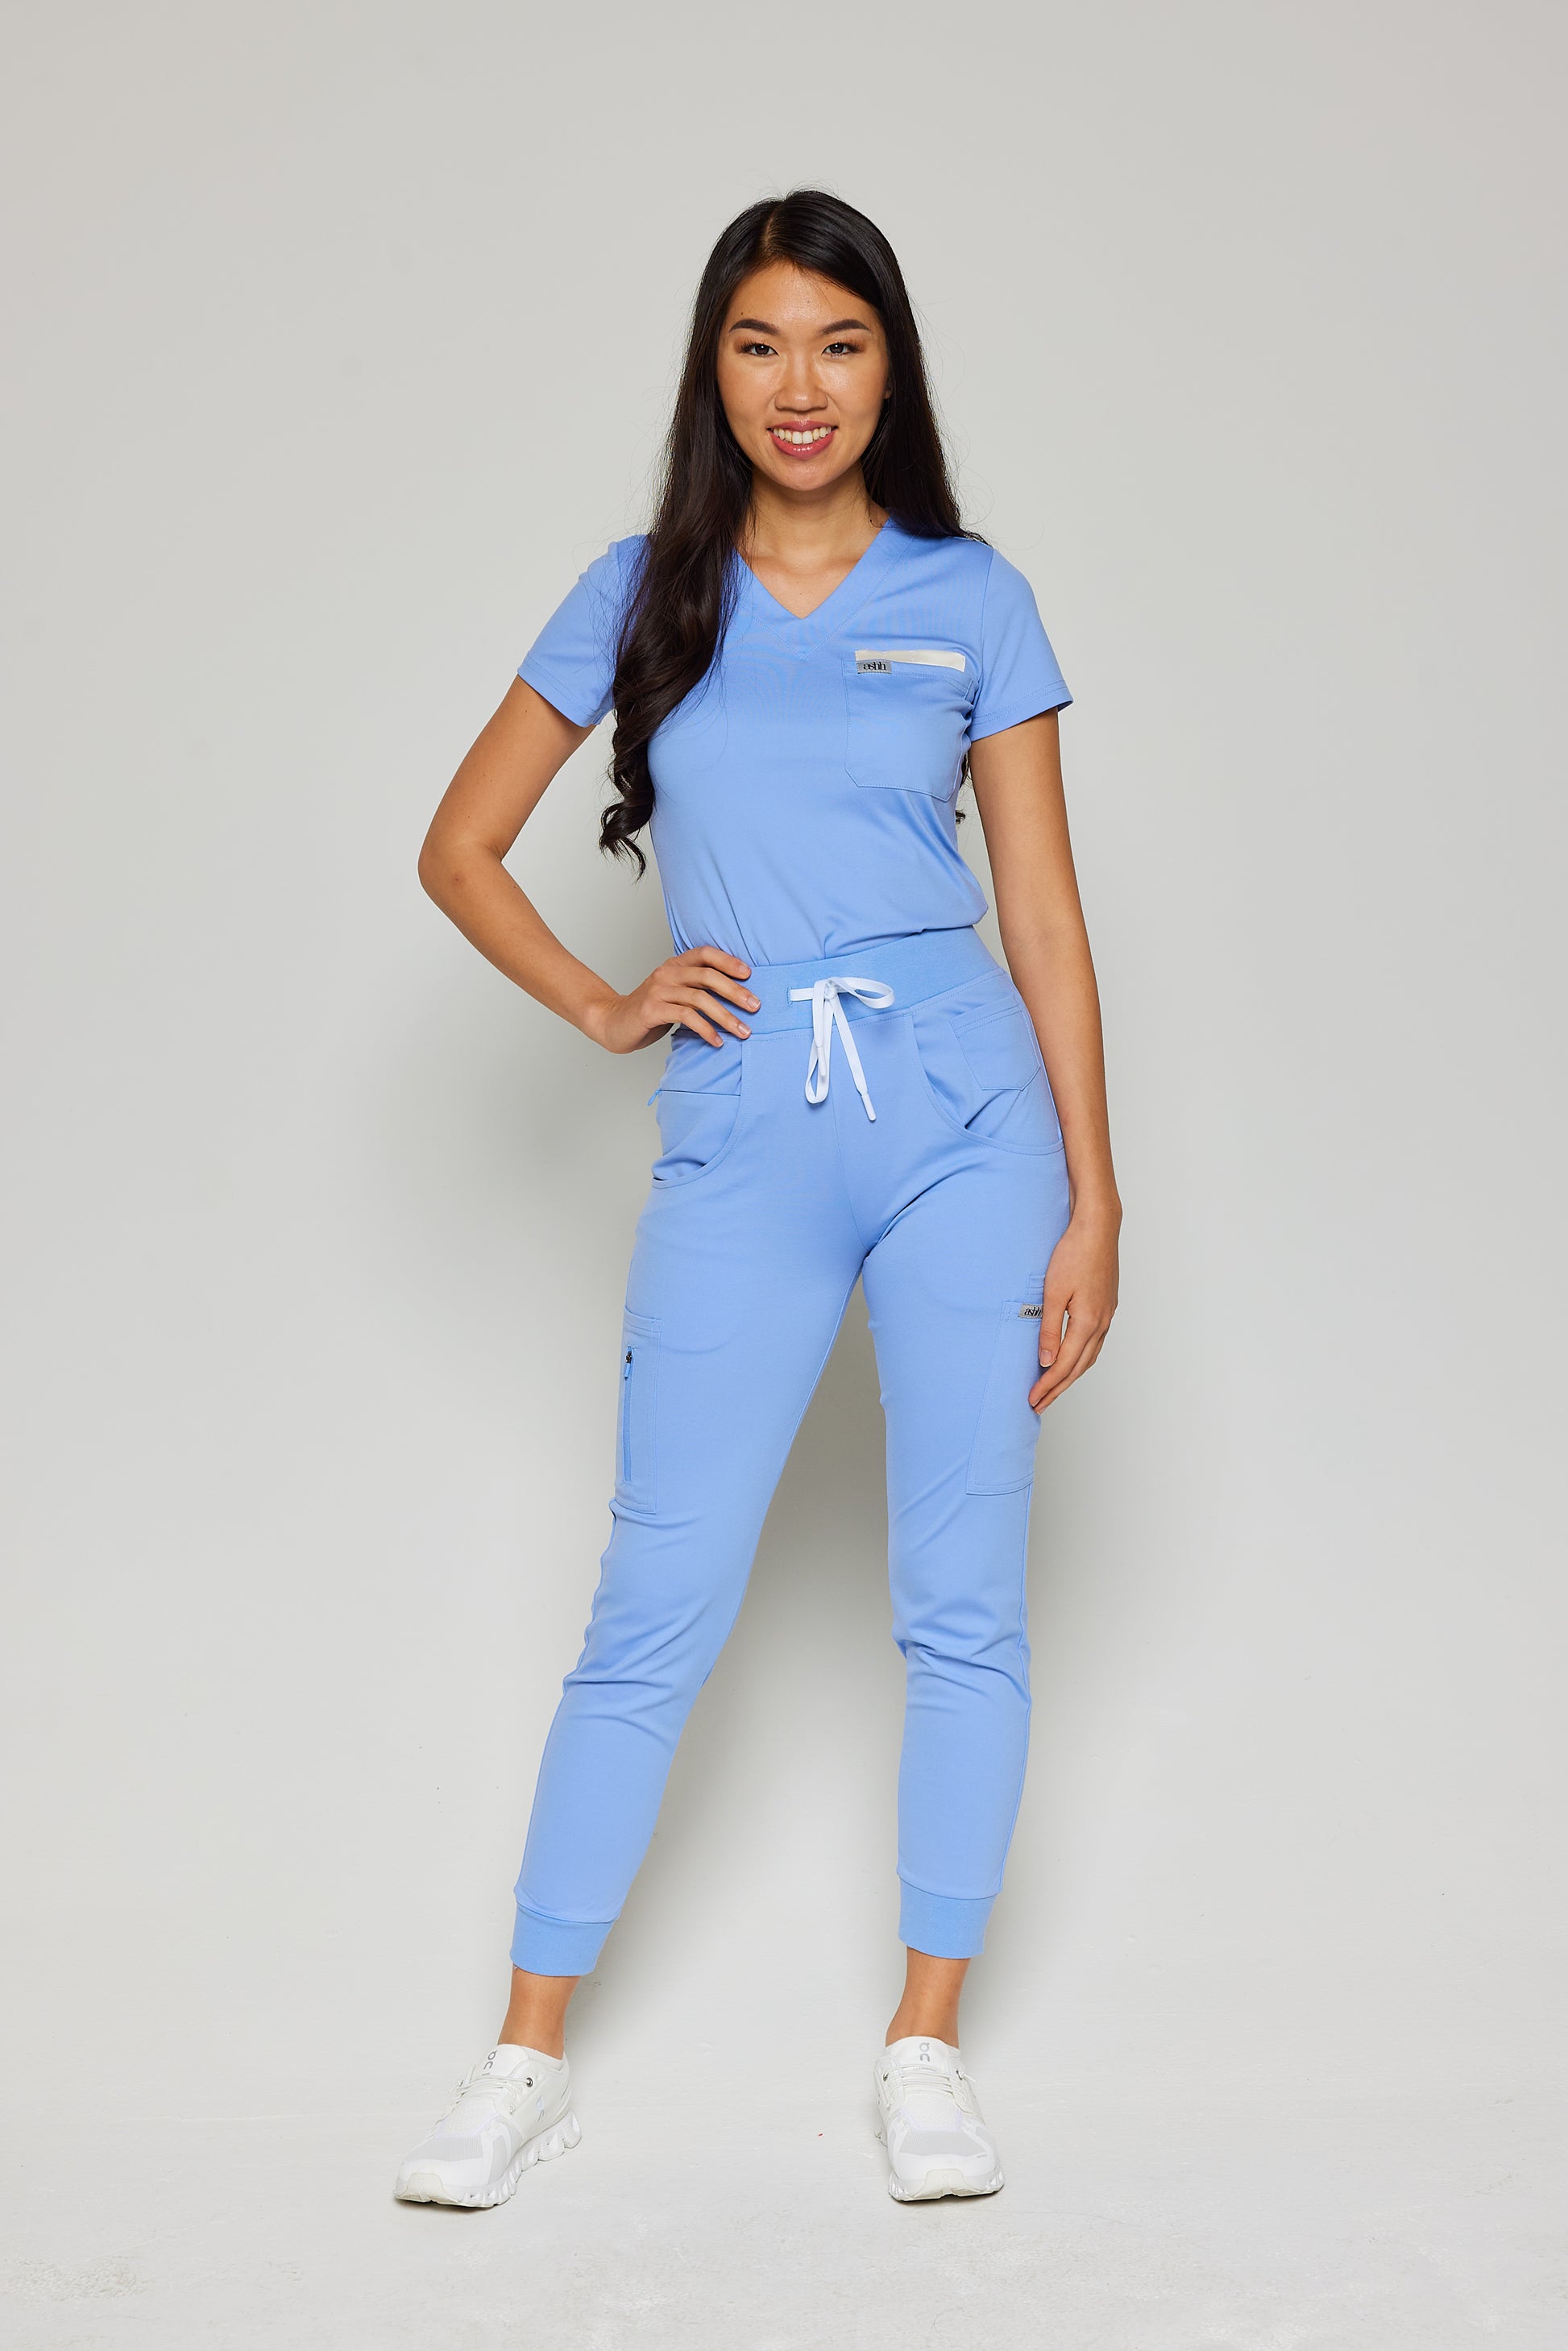 These New Scrubs Are Awesome // FABLETICS SCRUB REVIEW 